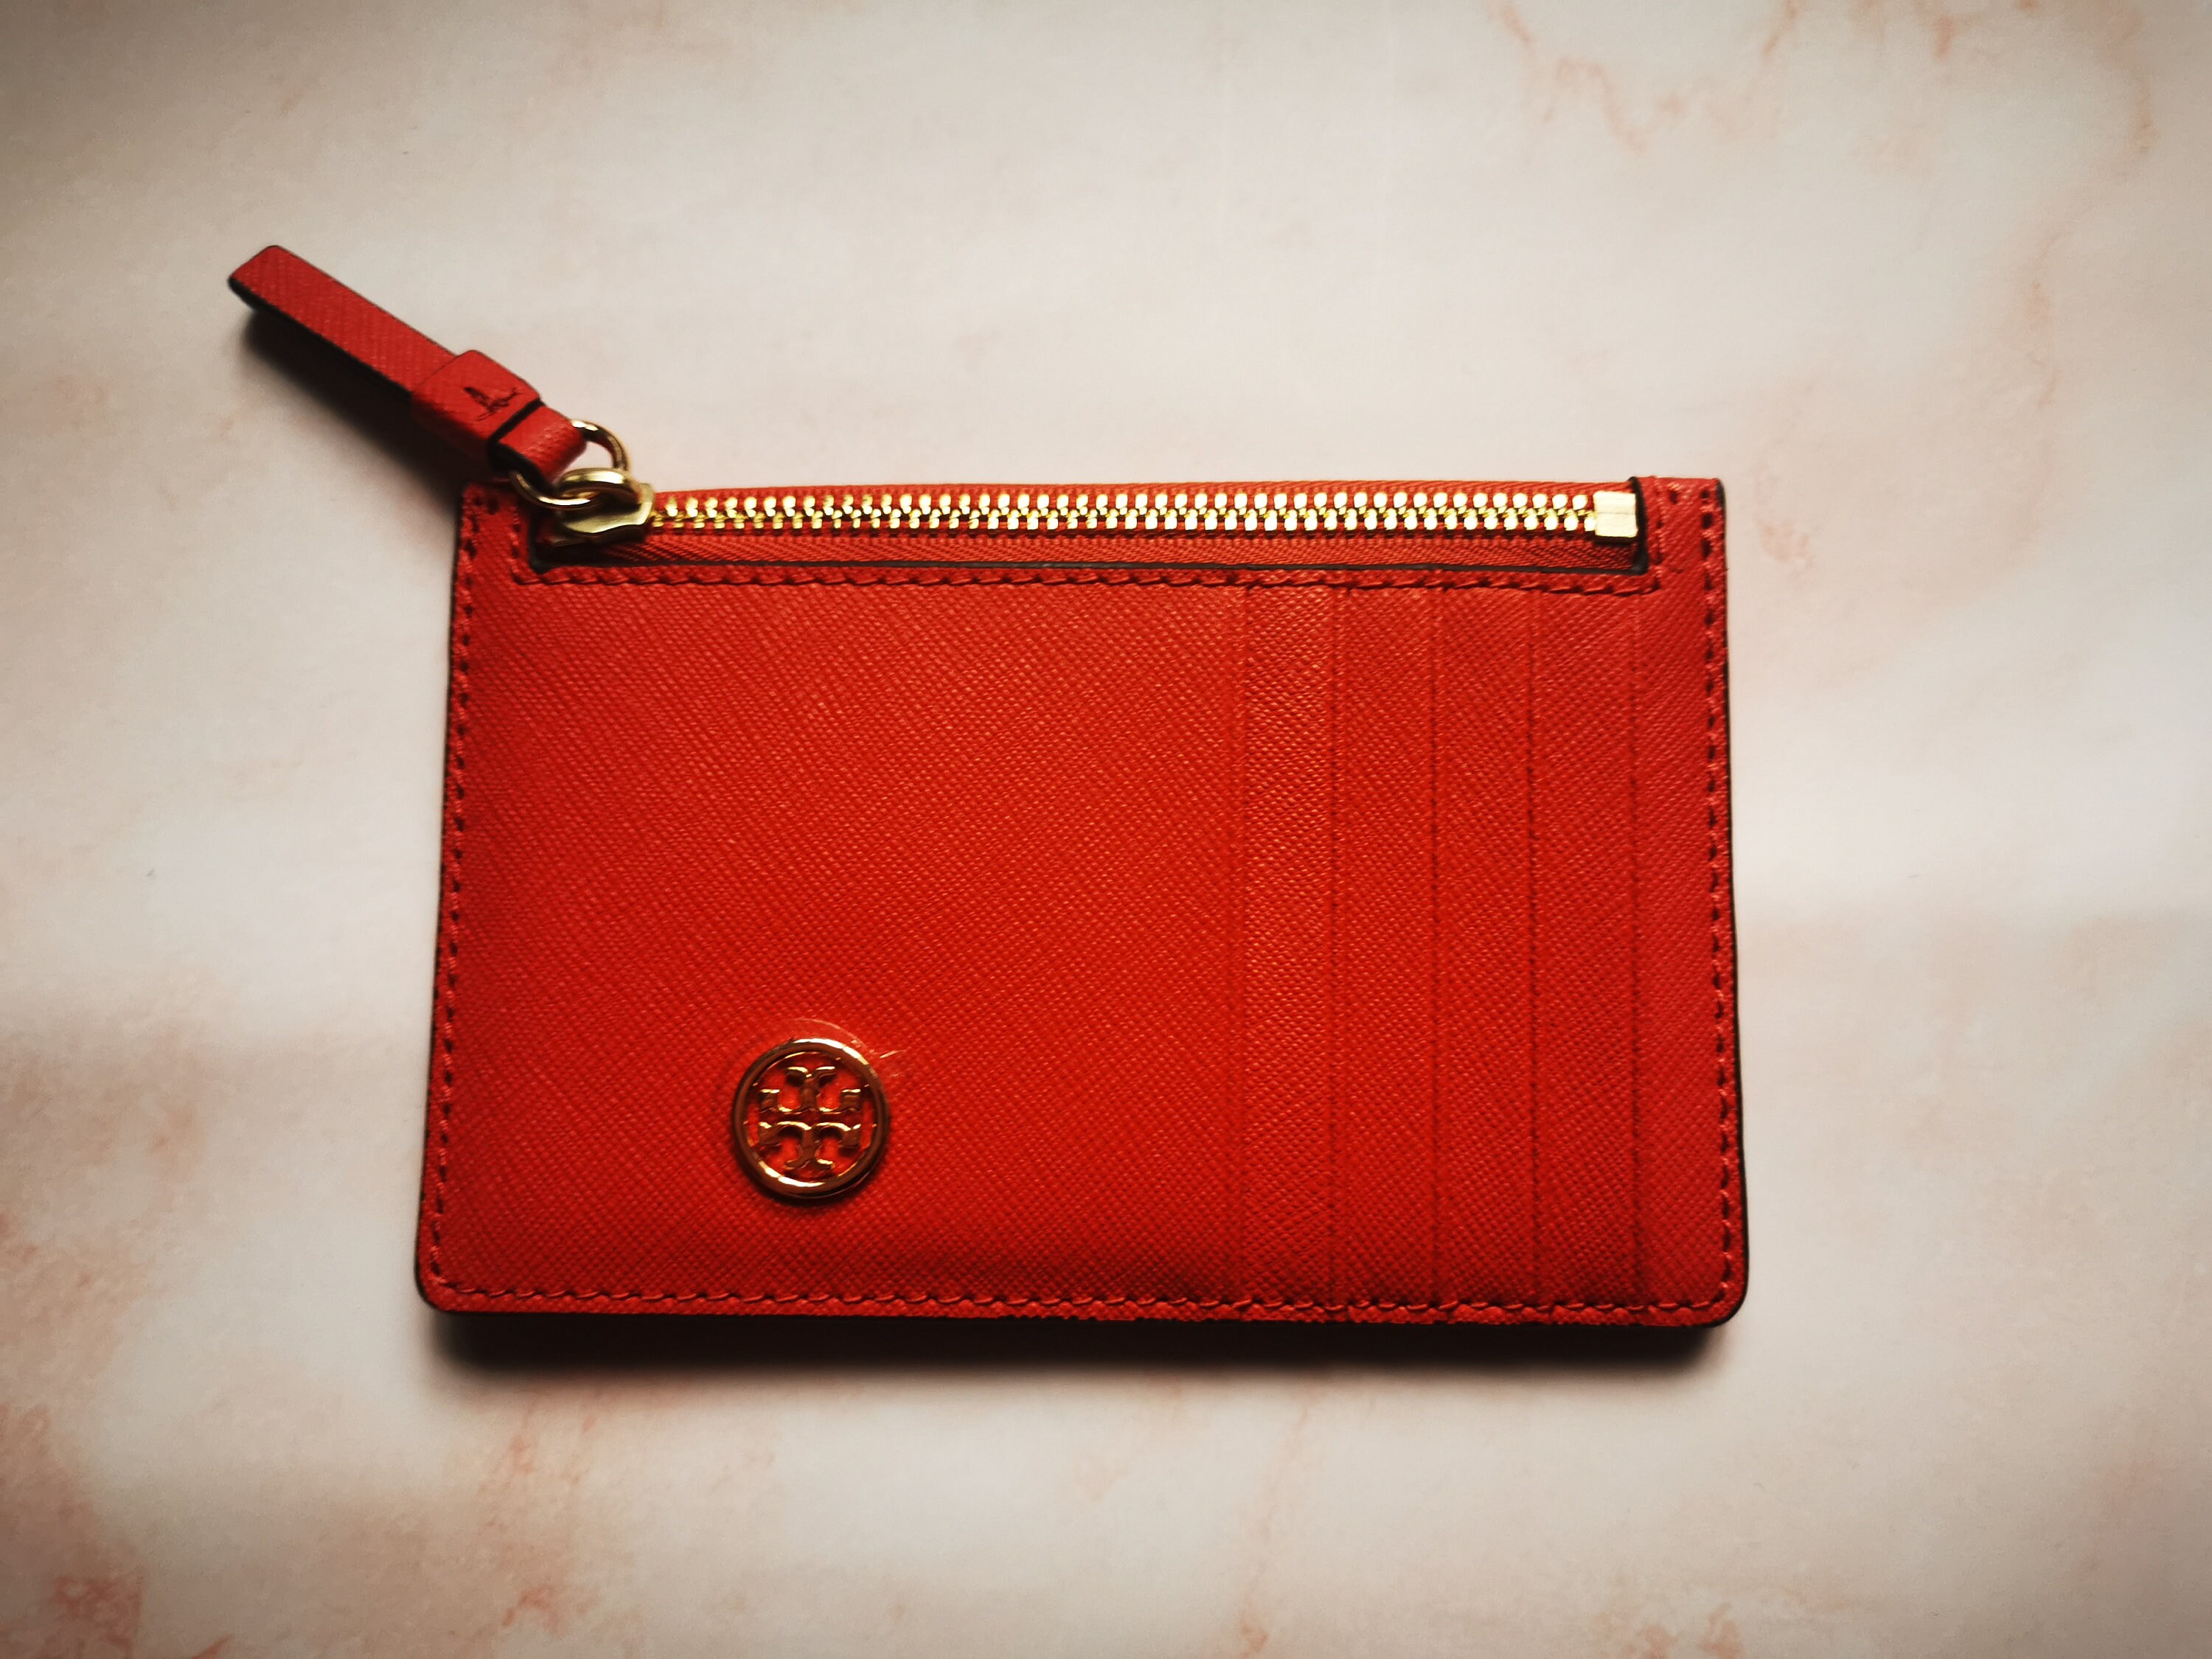 TORY BURCH OUTLET 50%OFF SALE! SHOP WITH ME** UNBOXING TORY BURCH EMERSON  KEY CASE AND COIN PURSE 